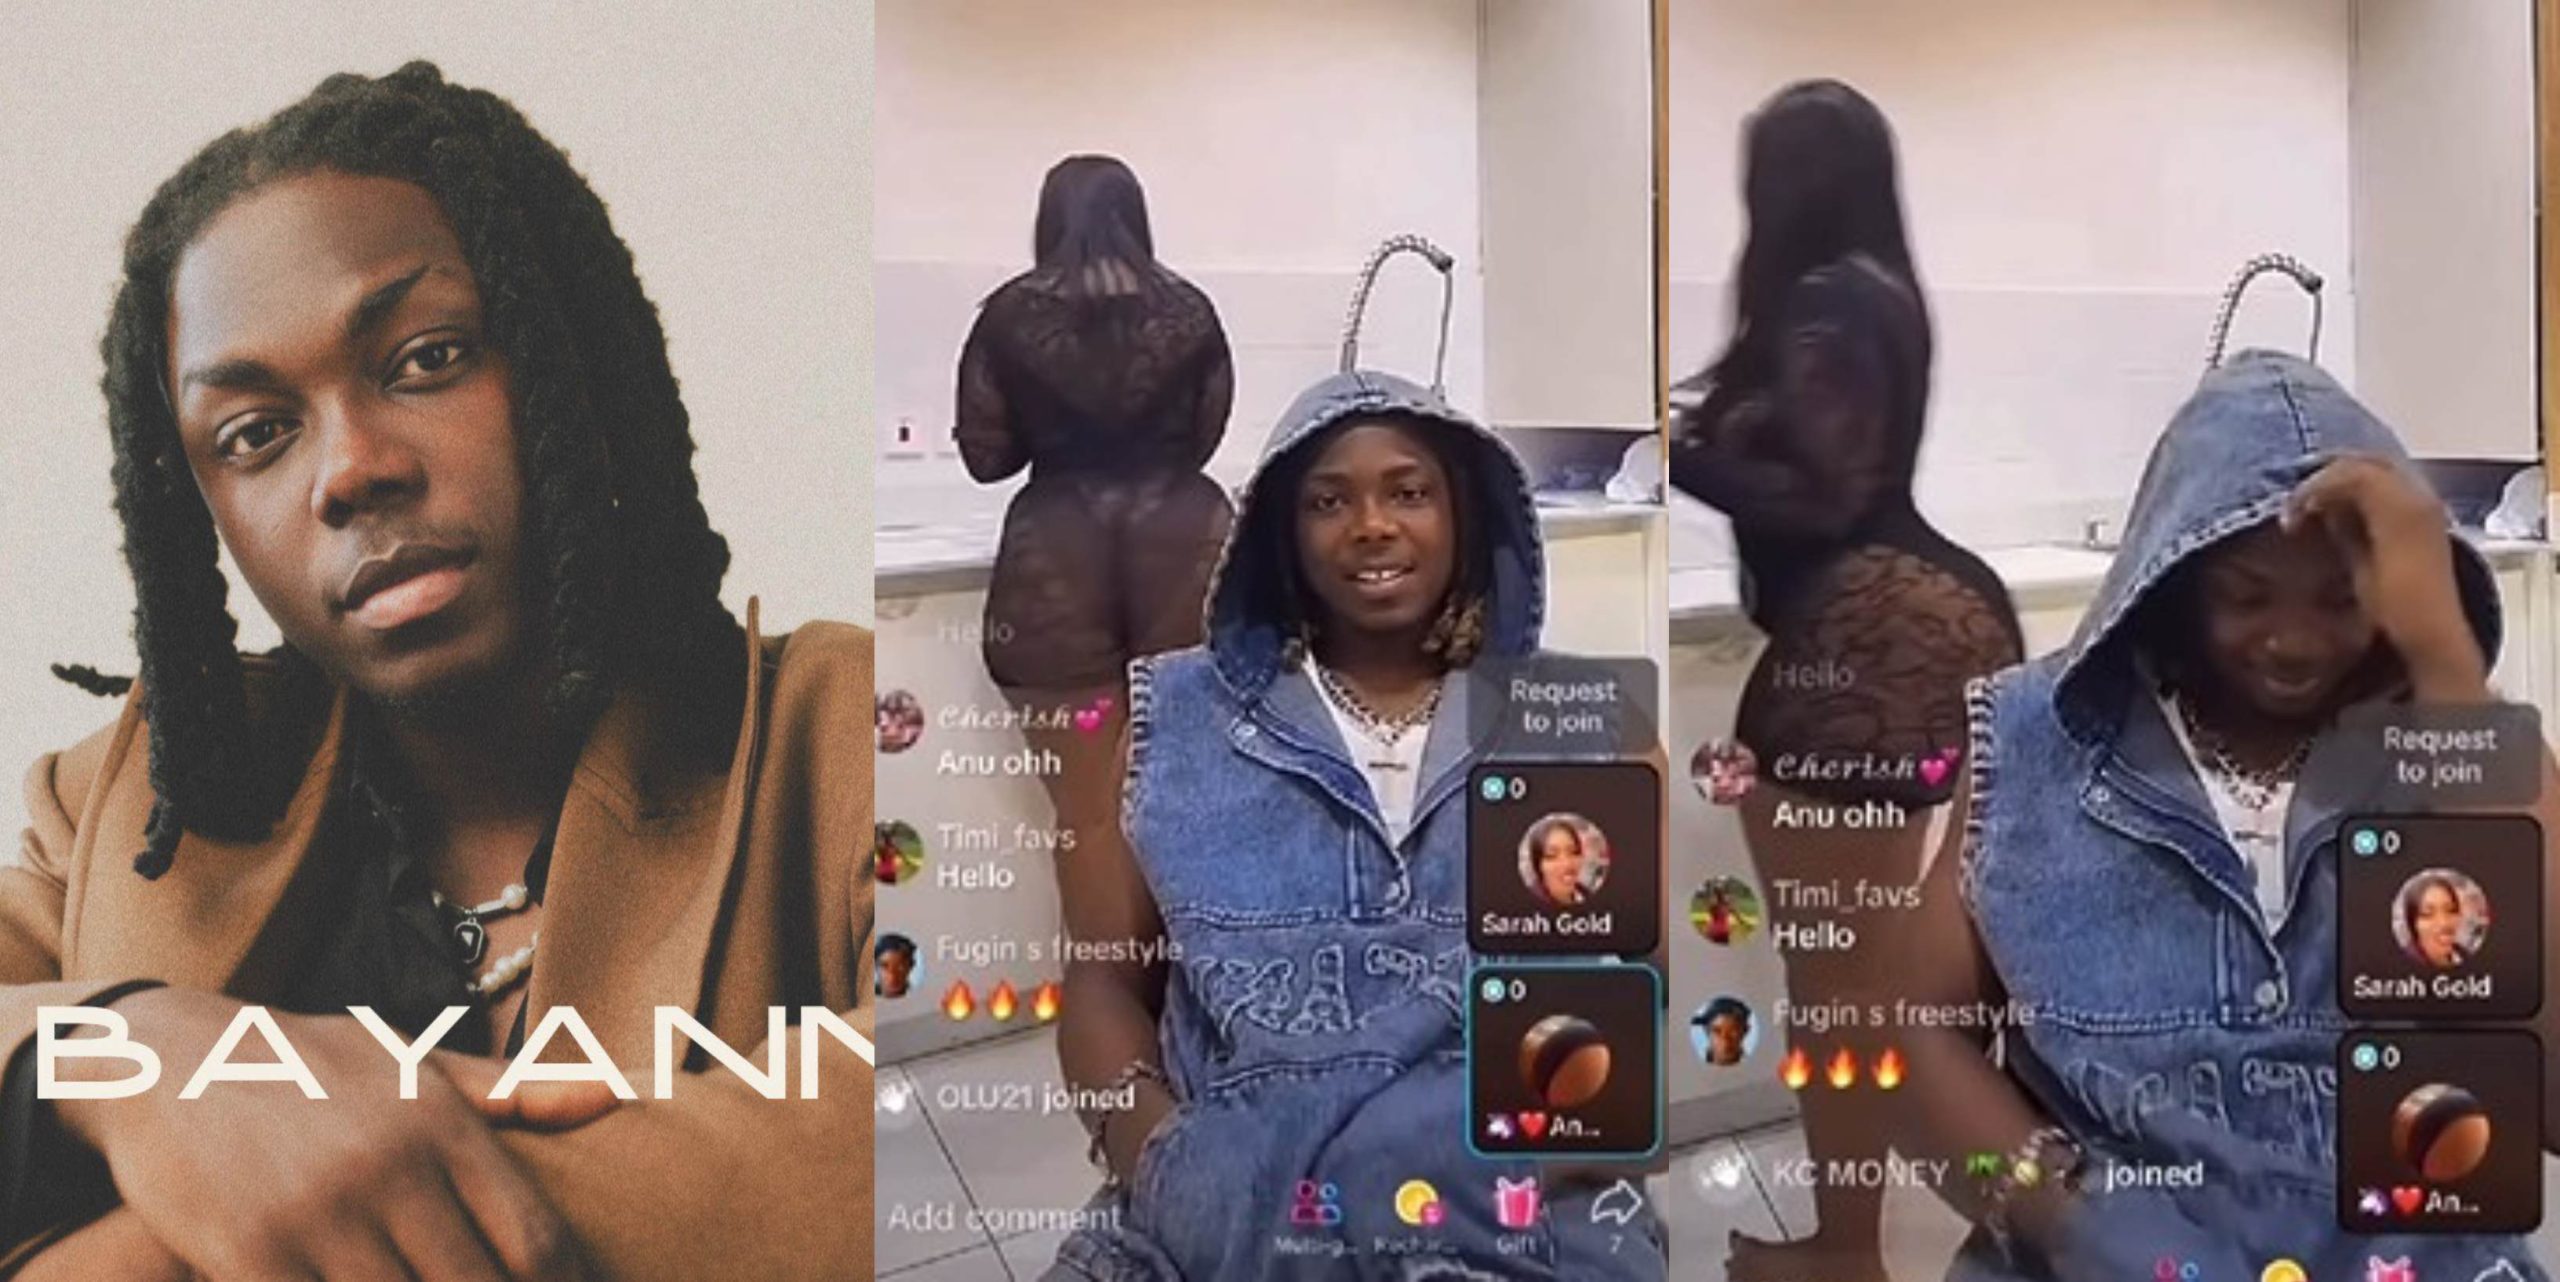 Singer Bayanni feels embarrassed as curvy lady interrupted his live video with her behind